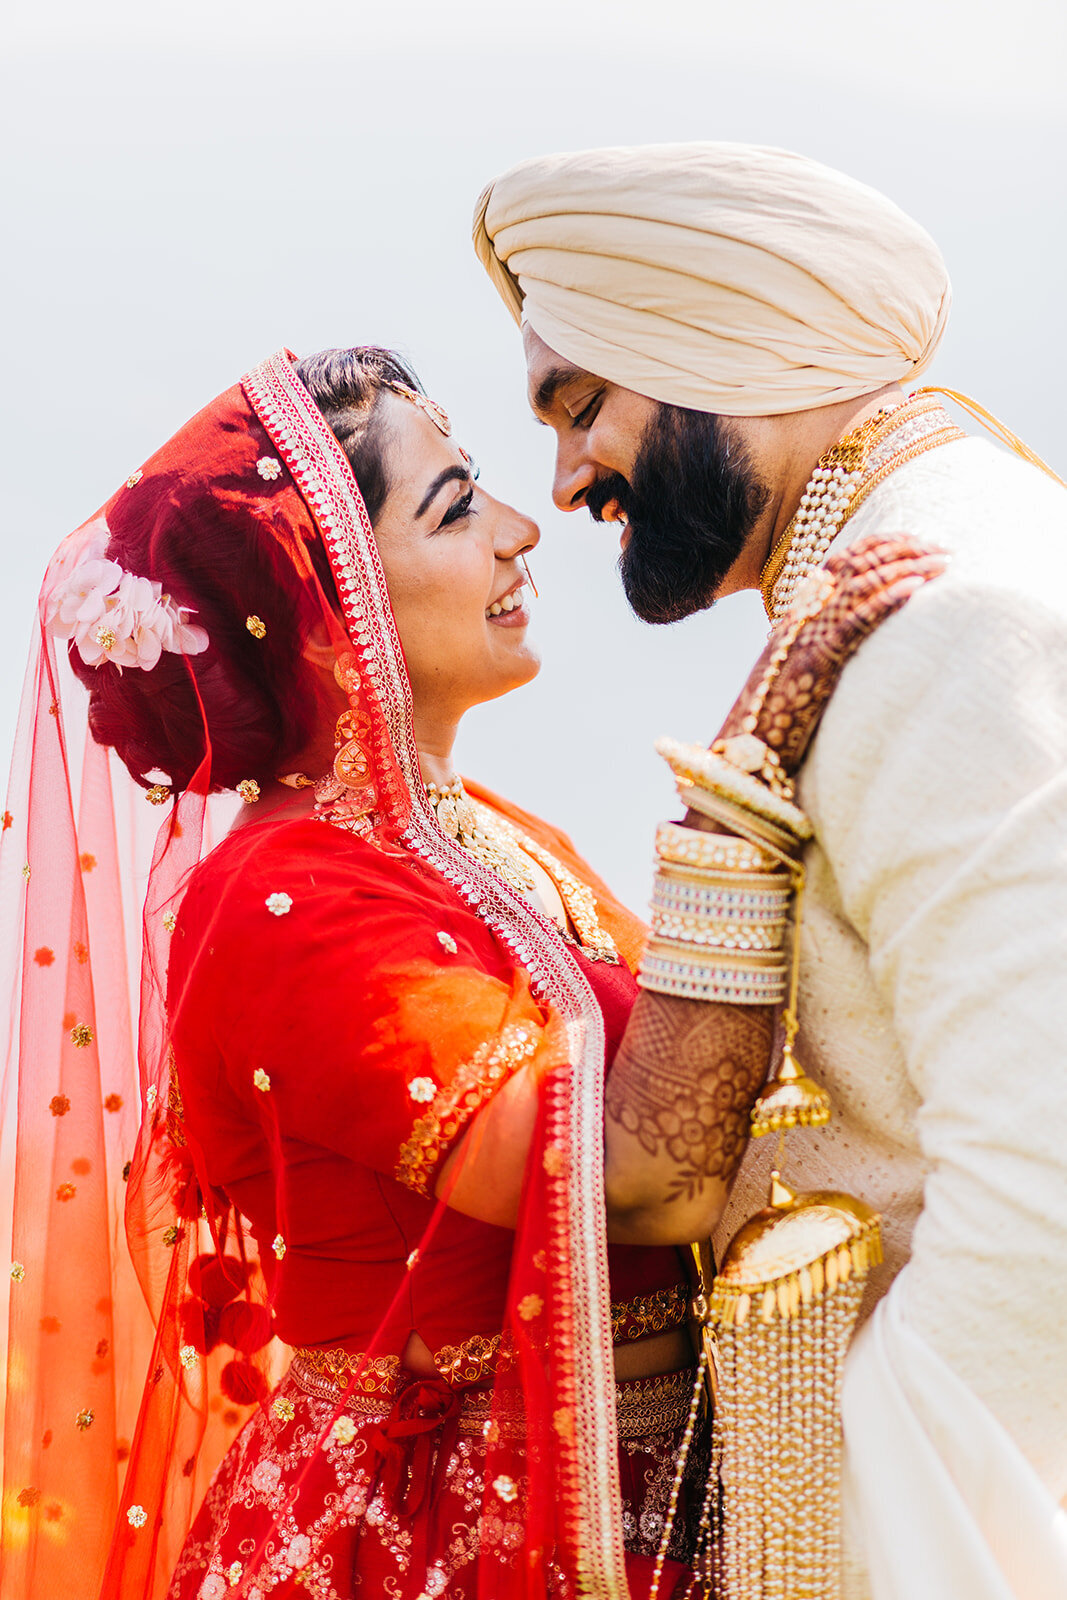 Sikh bride with a red veil and groom in a beige suit look into each other's eyes and smile.